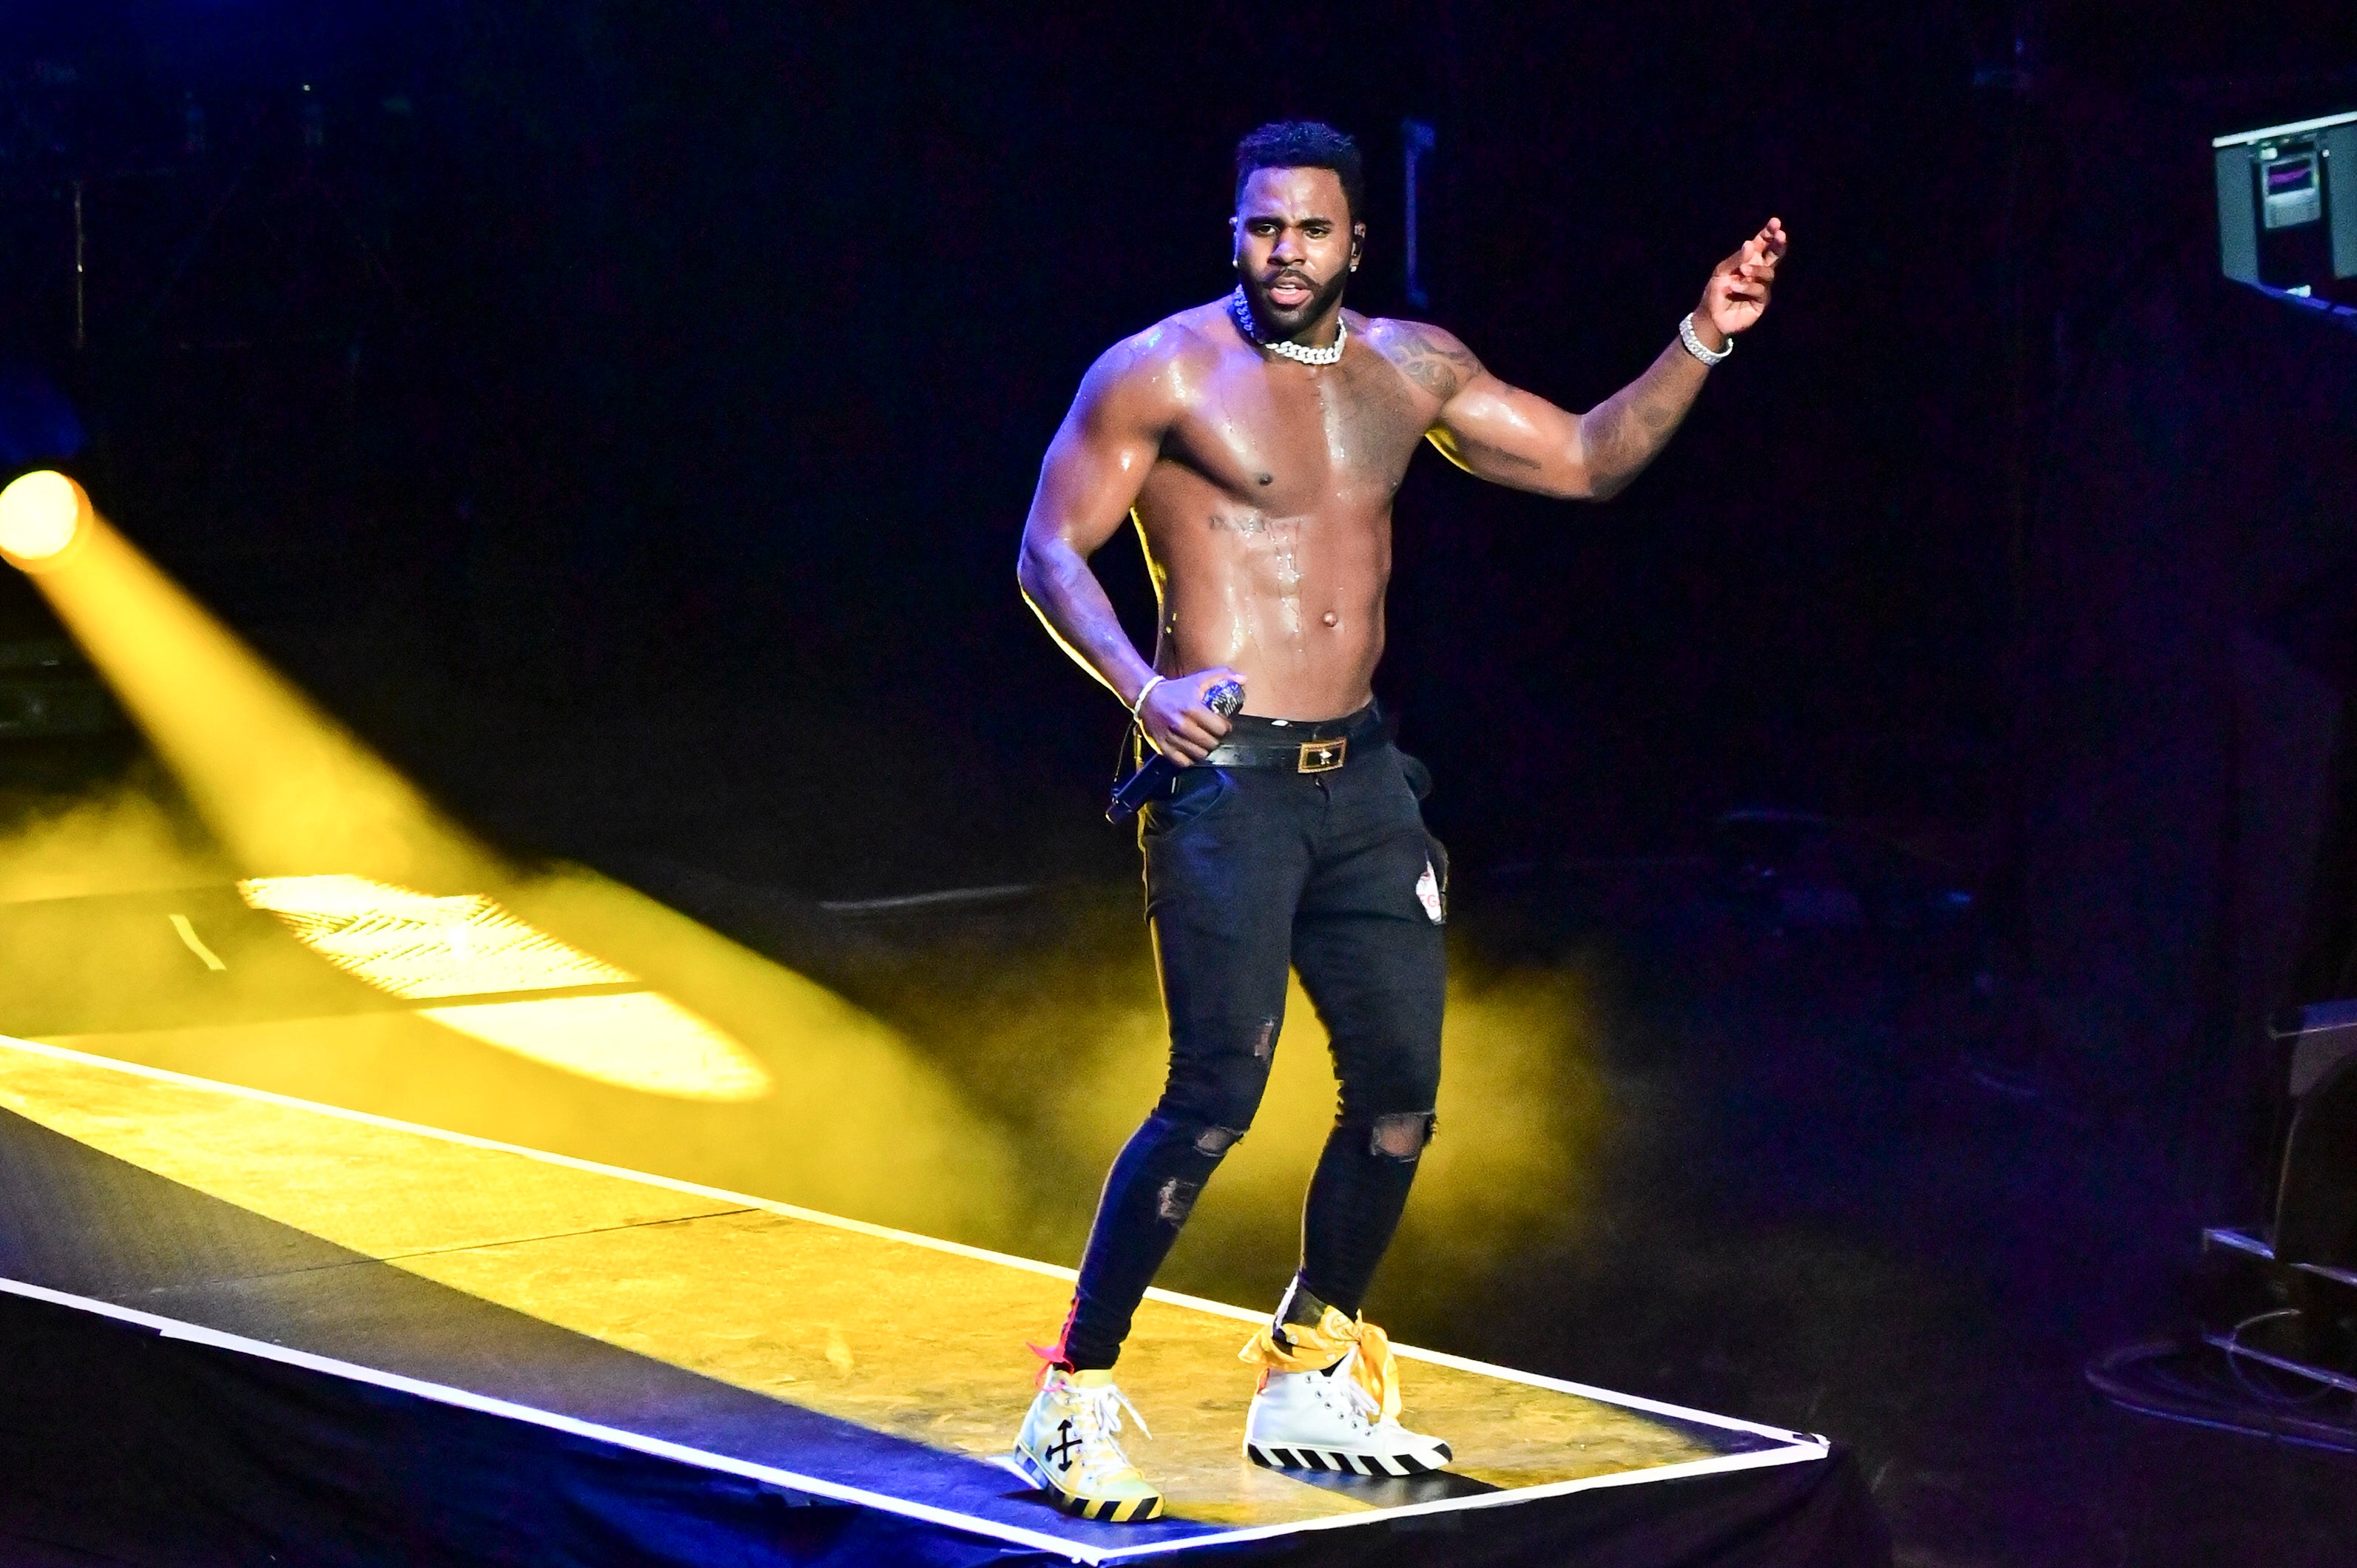 Derulo is reportedly adamant he will perform